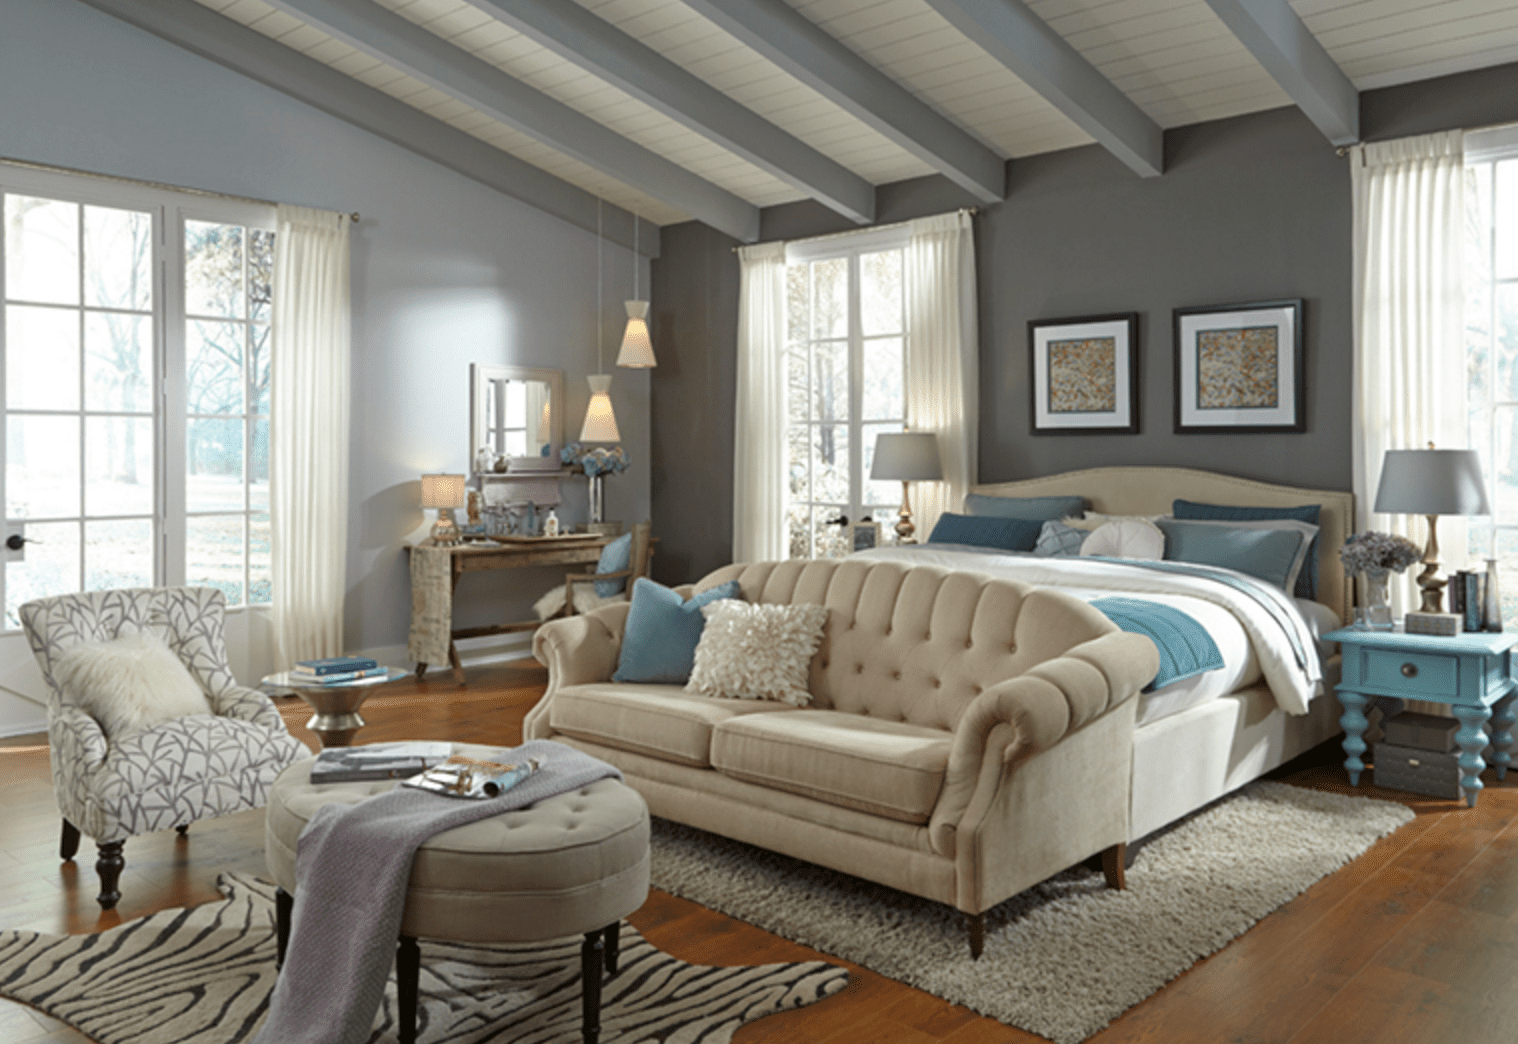 8 Colors Everyone Needs in Their Home